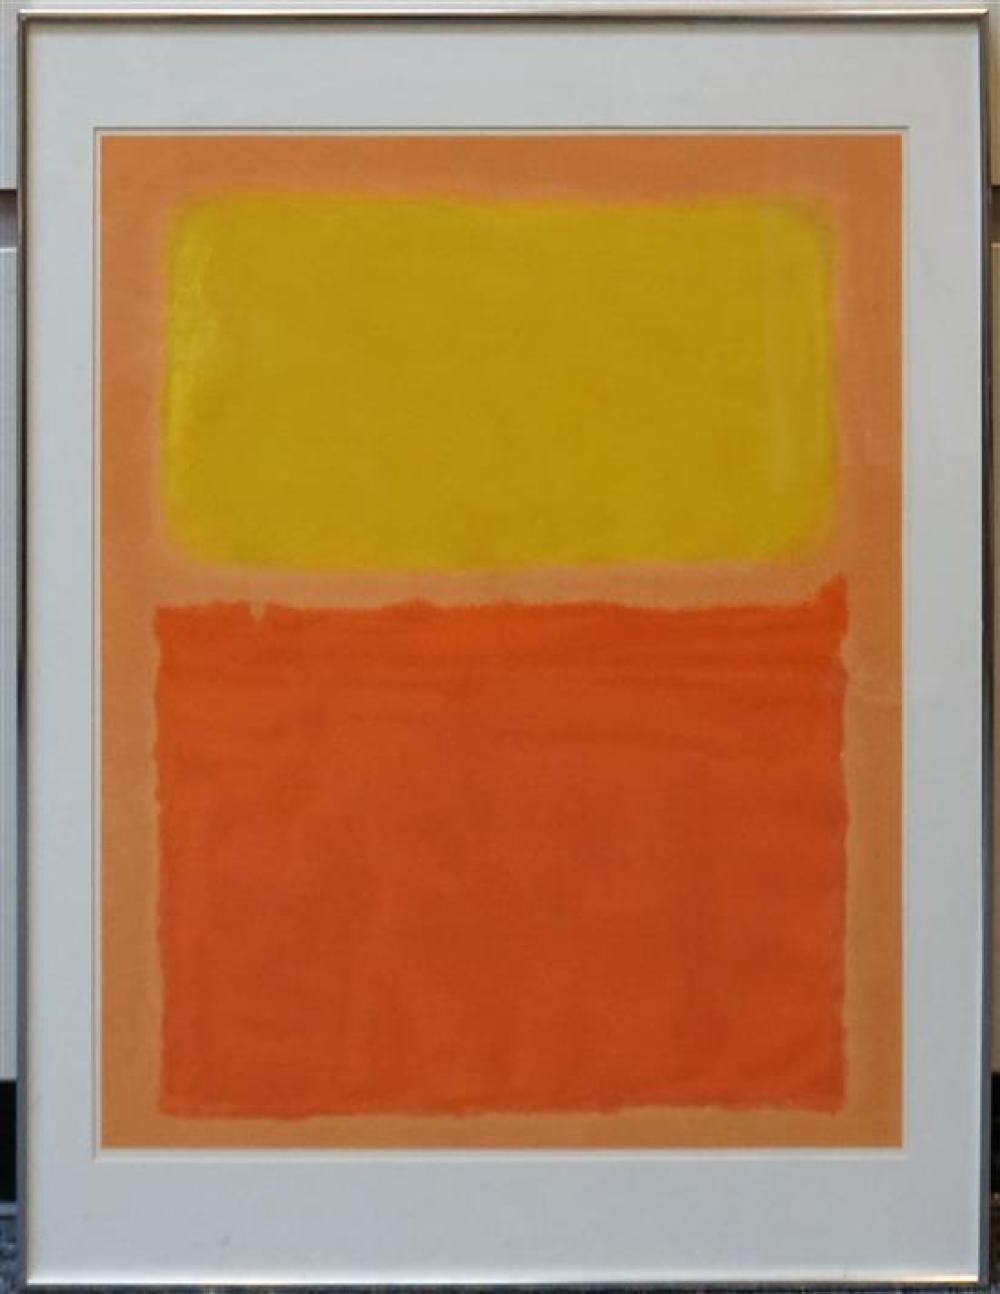 AFTER MARK ROTHKO, UNTITLED ABSTRACT,